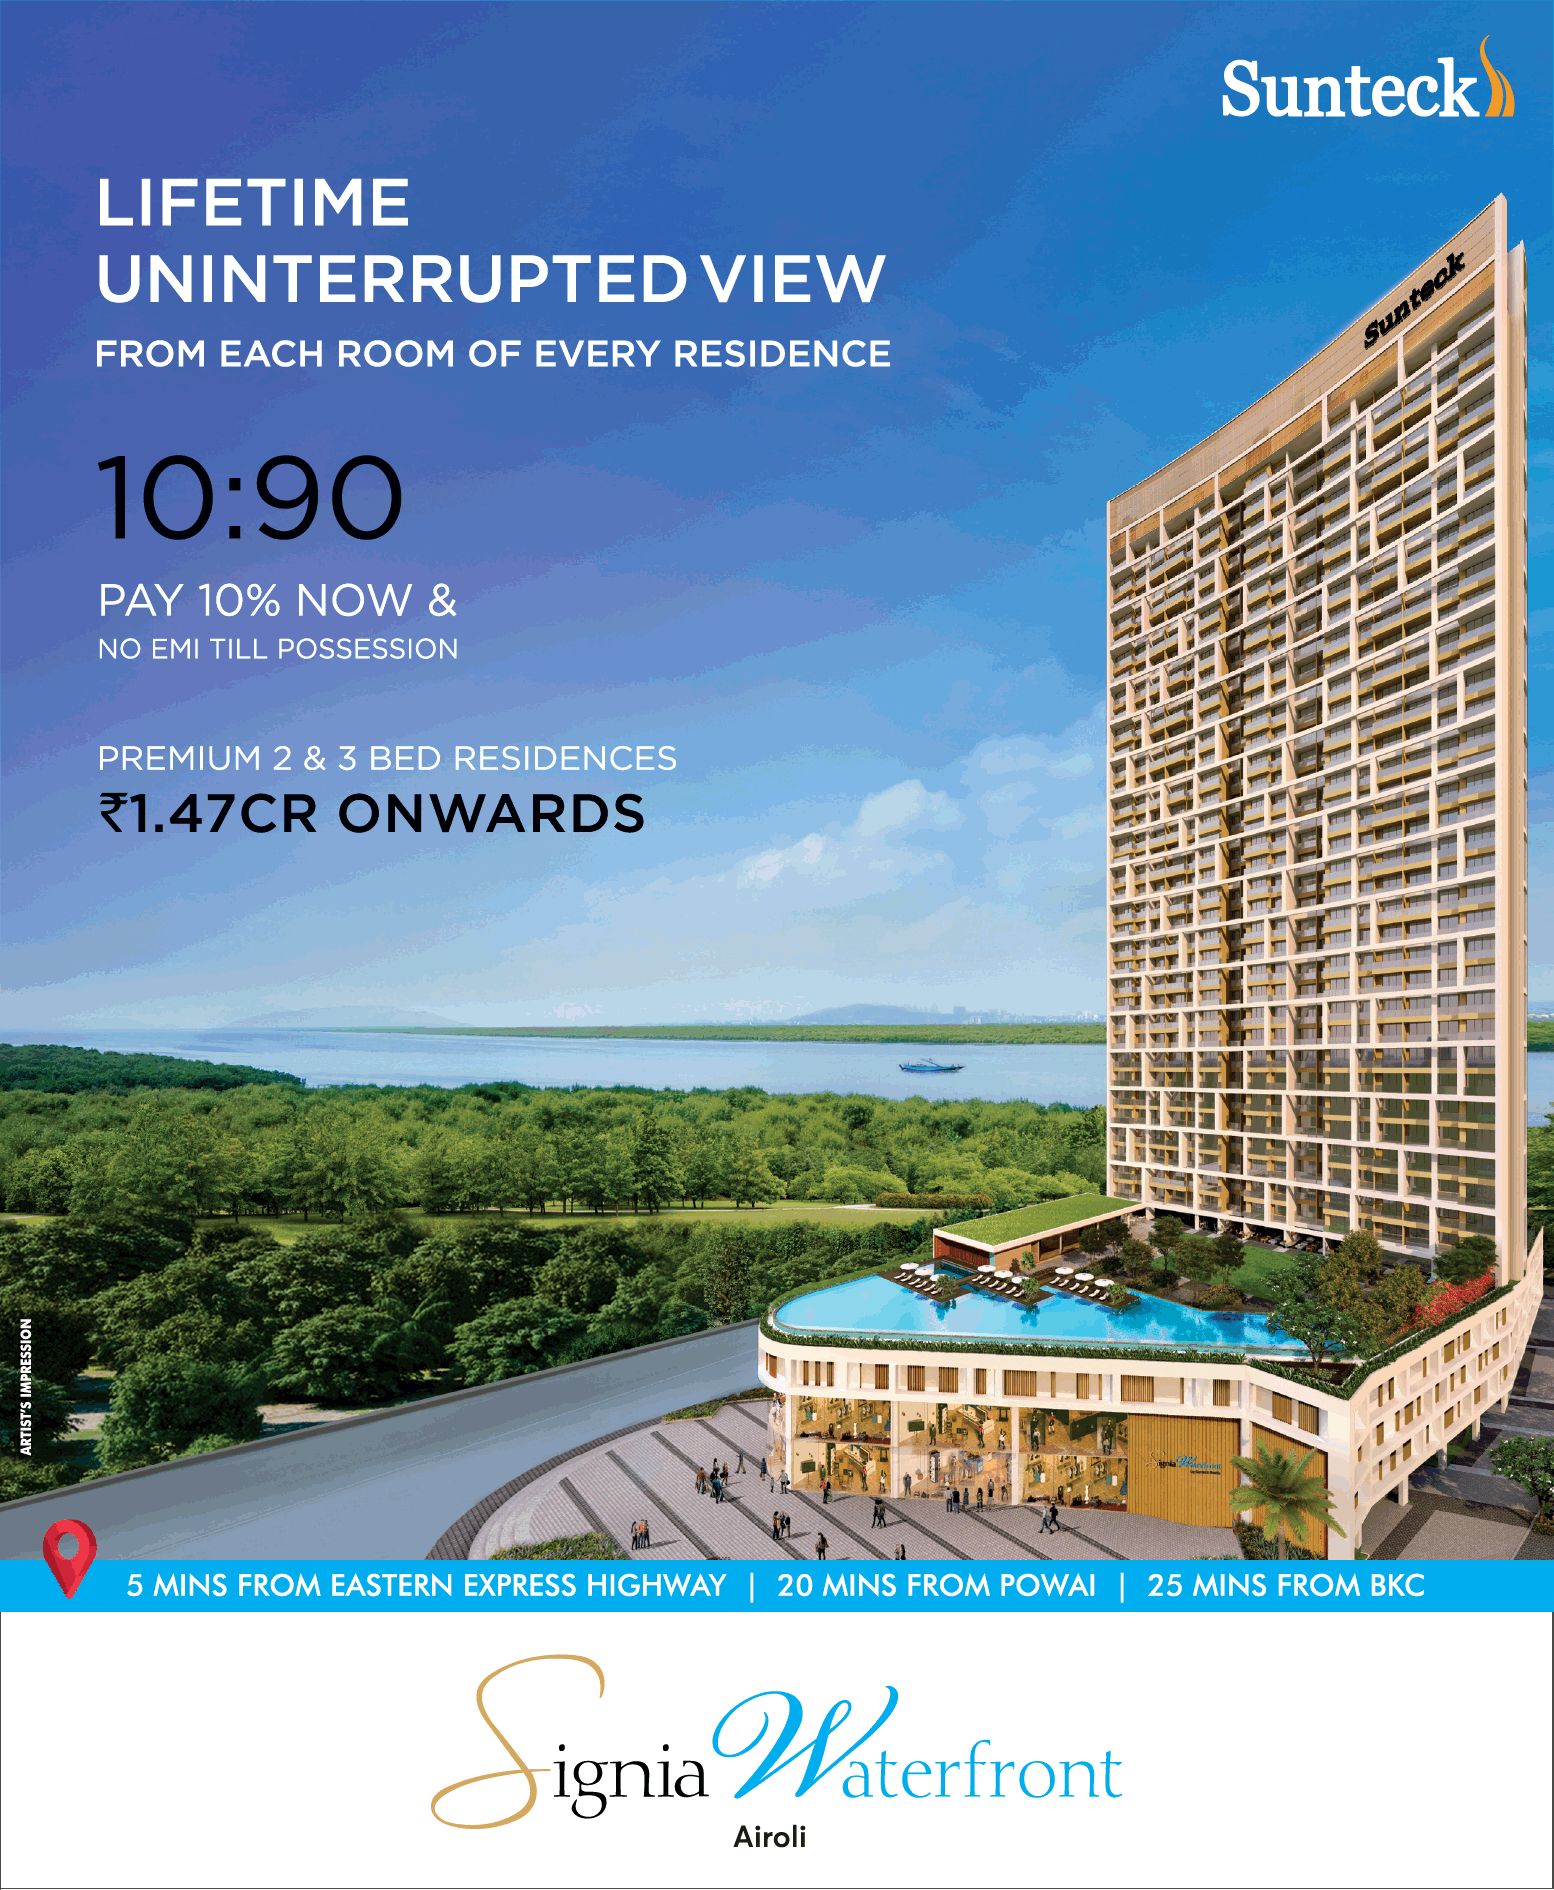 Pay 10% now & no EMI till possession at Sunteck Signia Waterfront in Navi Mumbai Update